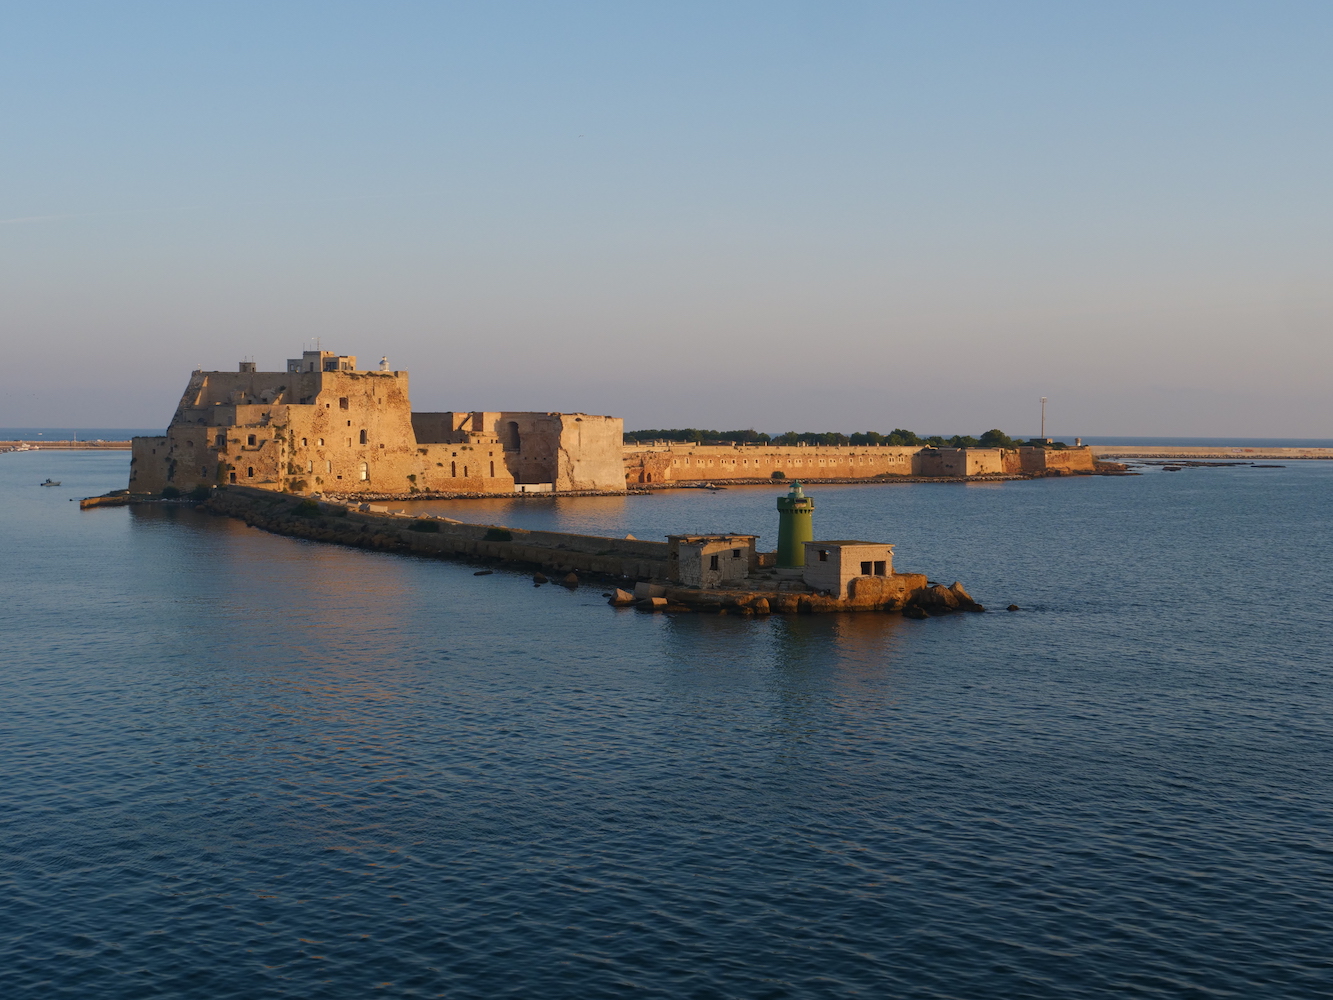  The old fort marking the entrance to Brindisi. 